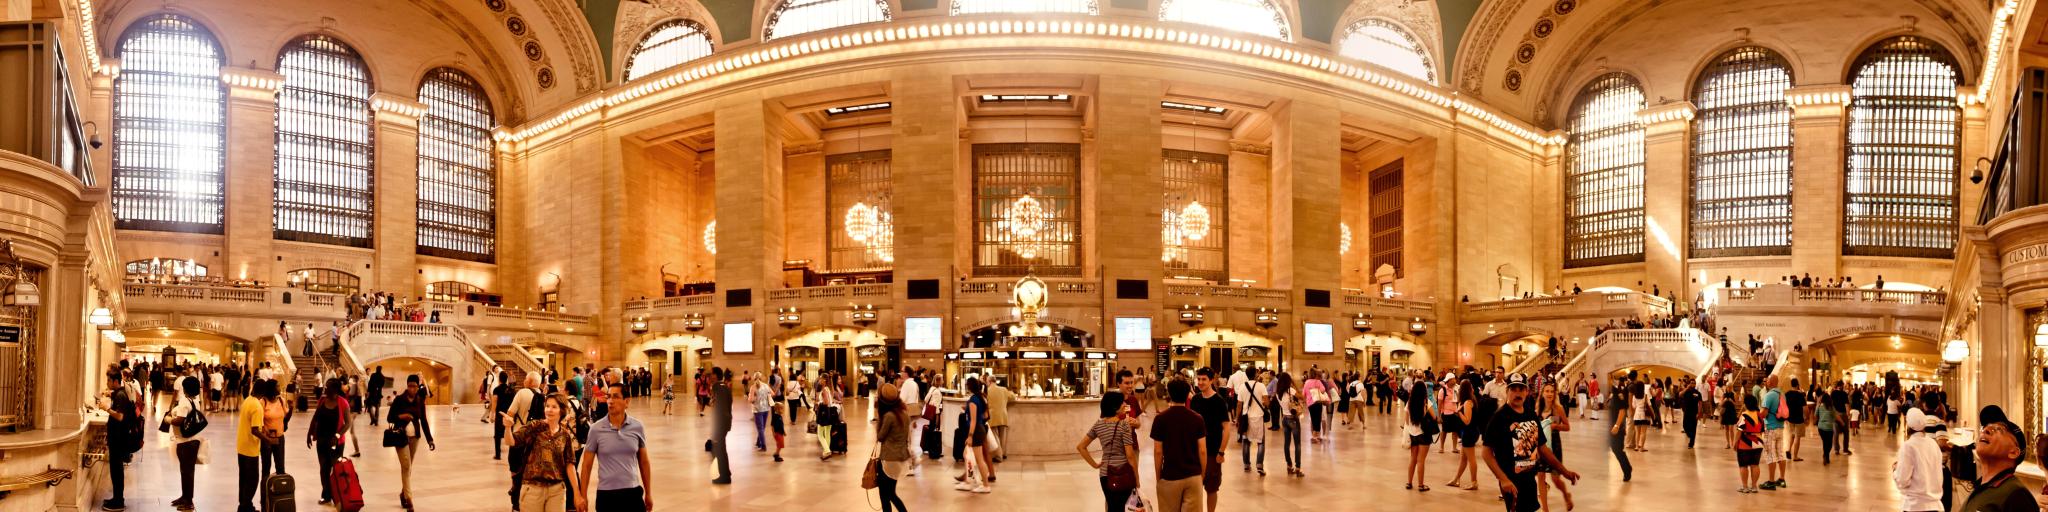 Interior of Grand Central Station, New York